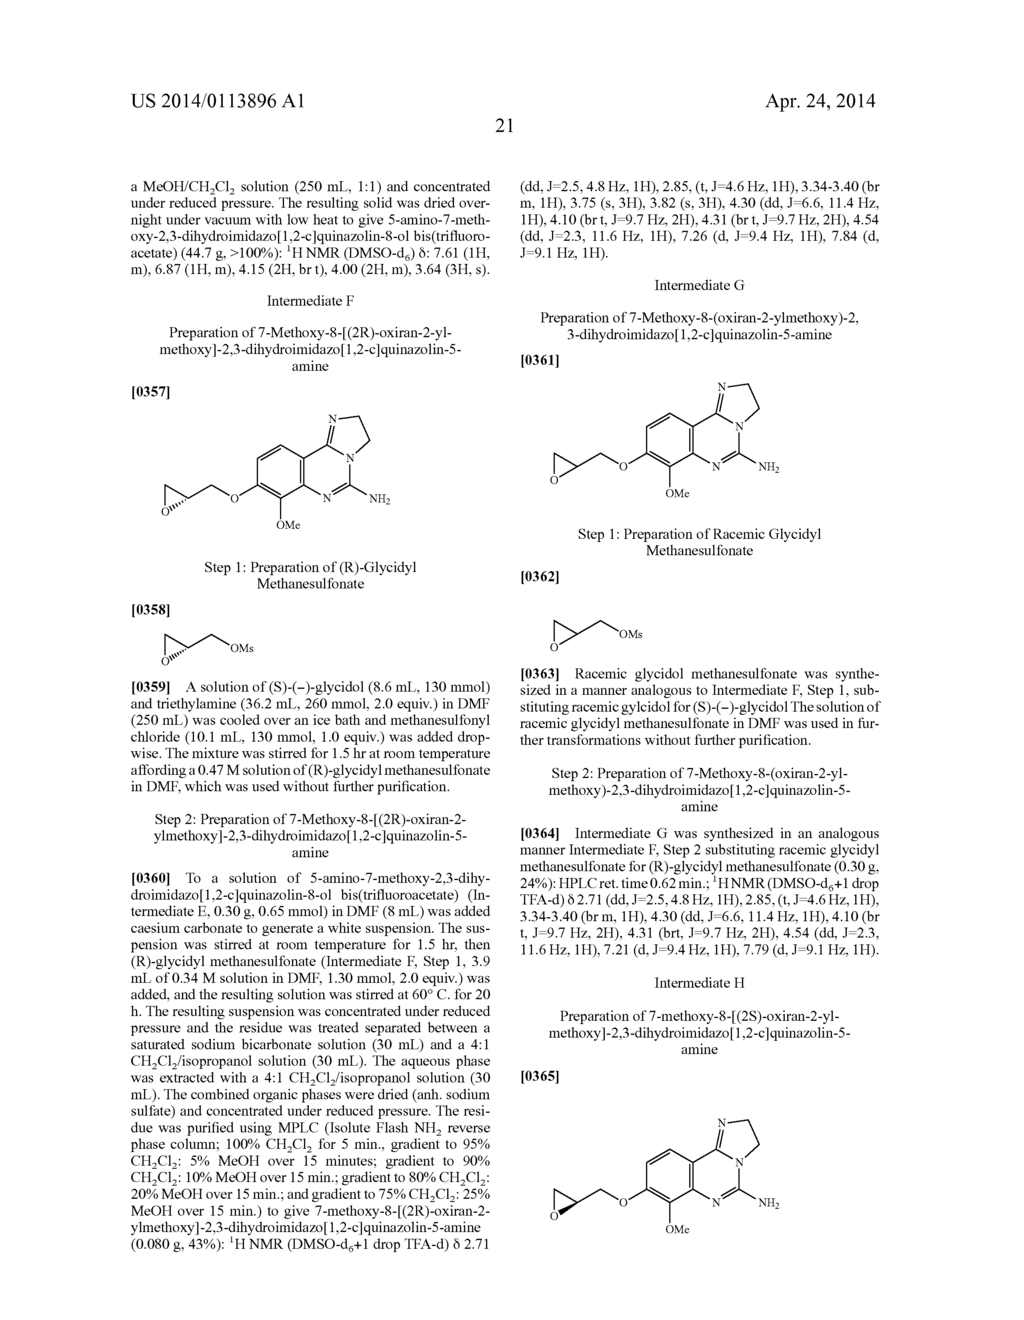 ARYLAMINOALCOHOL-SUBSTITUTED 2,3-DIHYDROIMIDAZO[1,2-C]QUINOLINES - diagram, schematic, and image 22